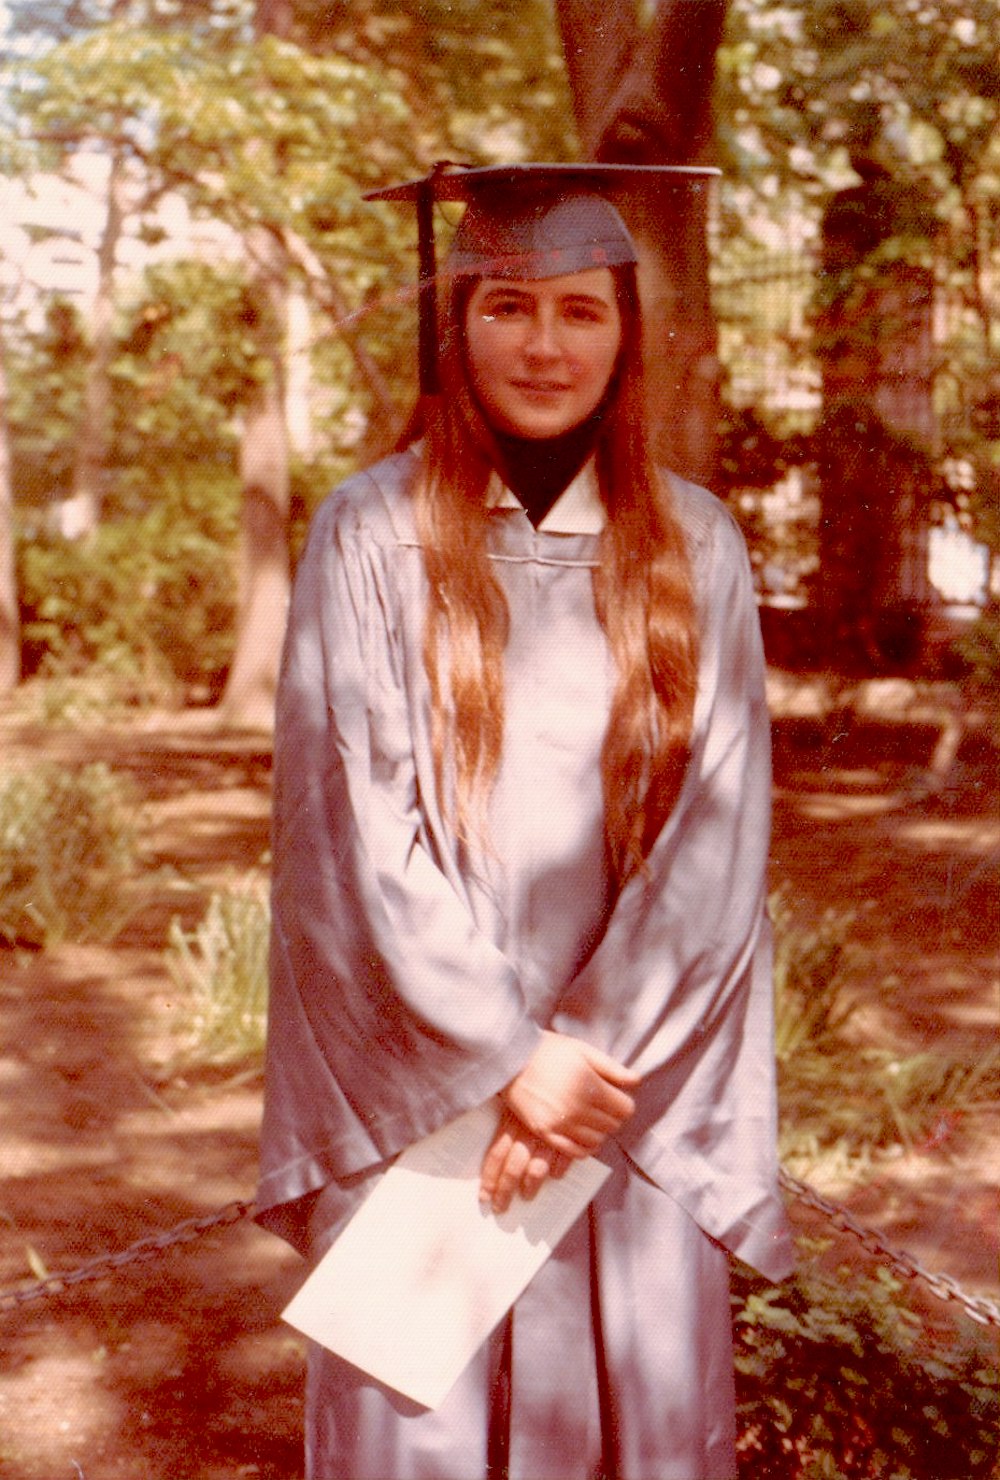 Anne graduating from Barnard College, New York City, NY. Photo courtesy of Anne Charles.